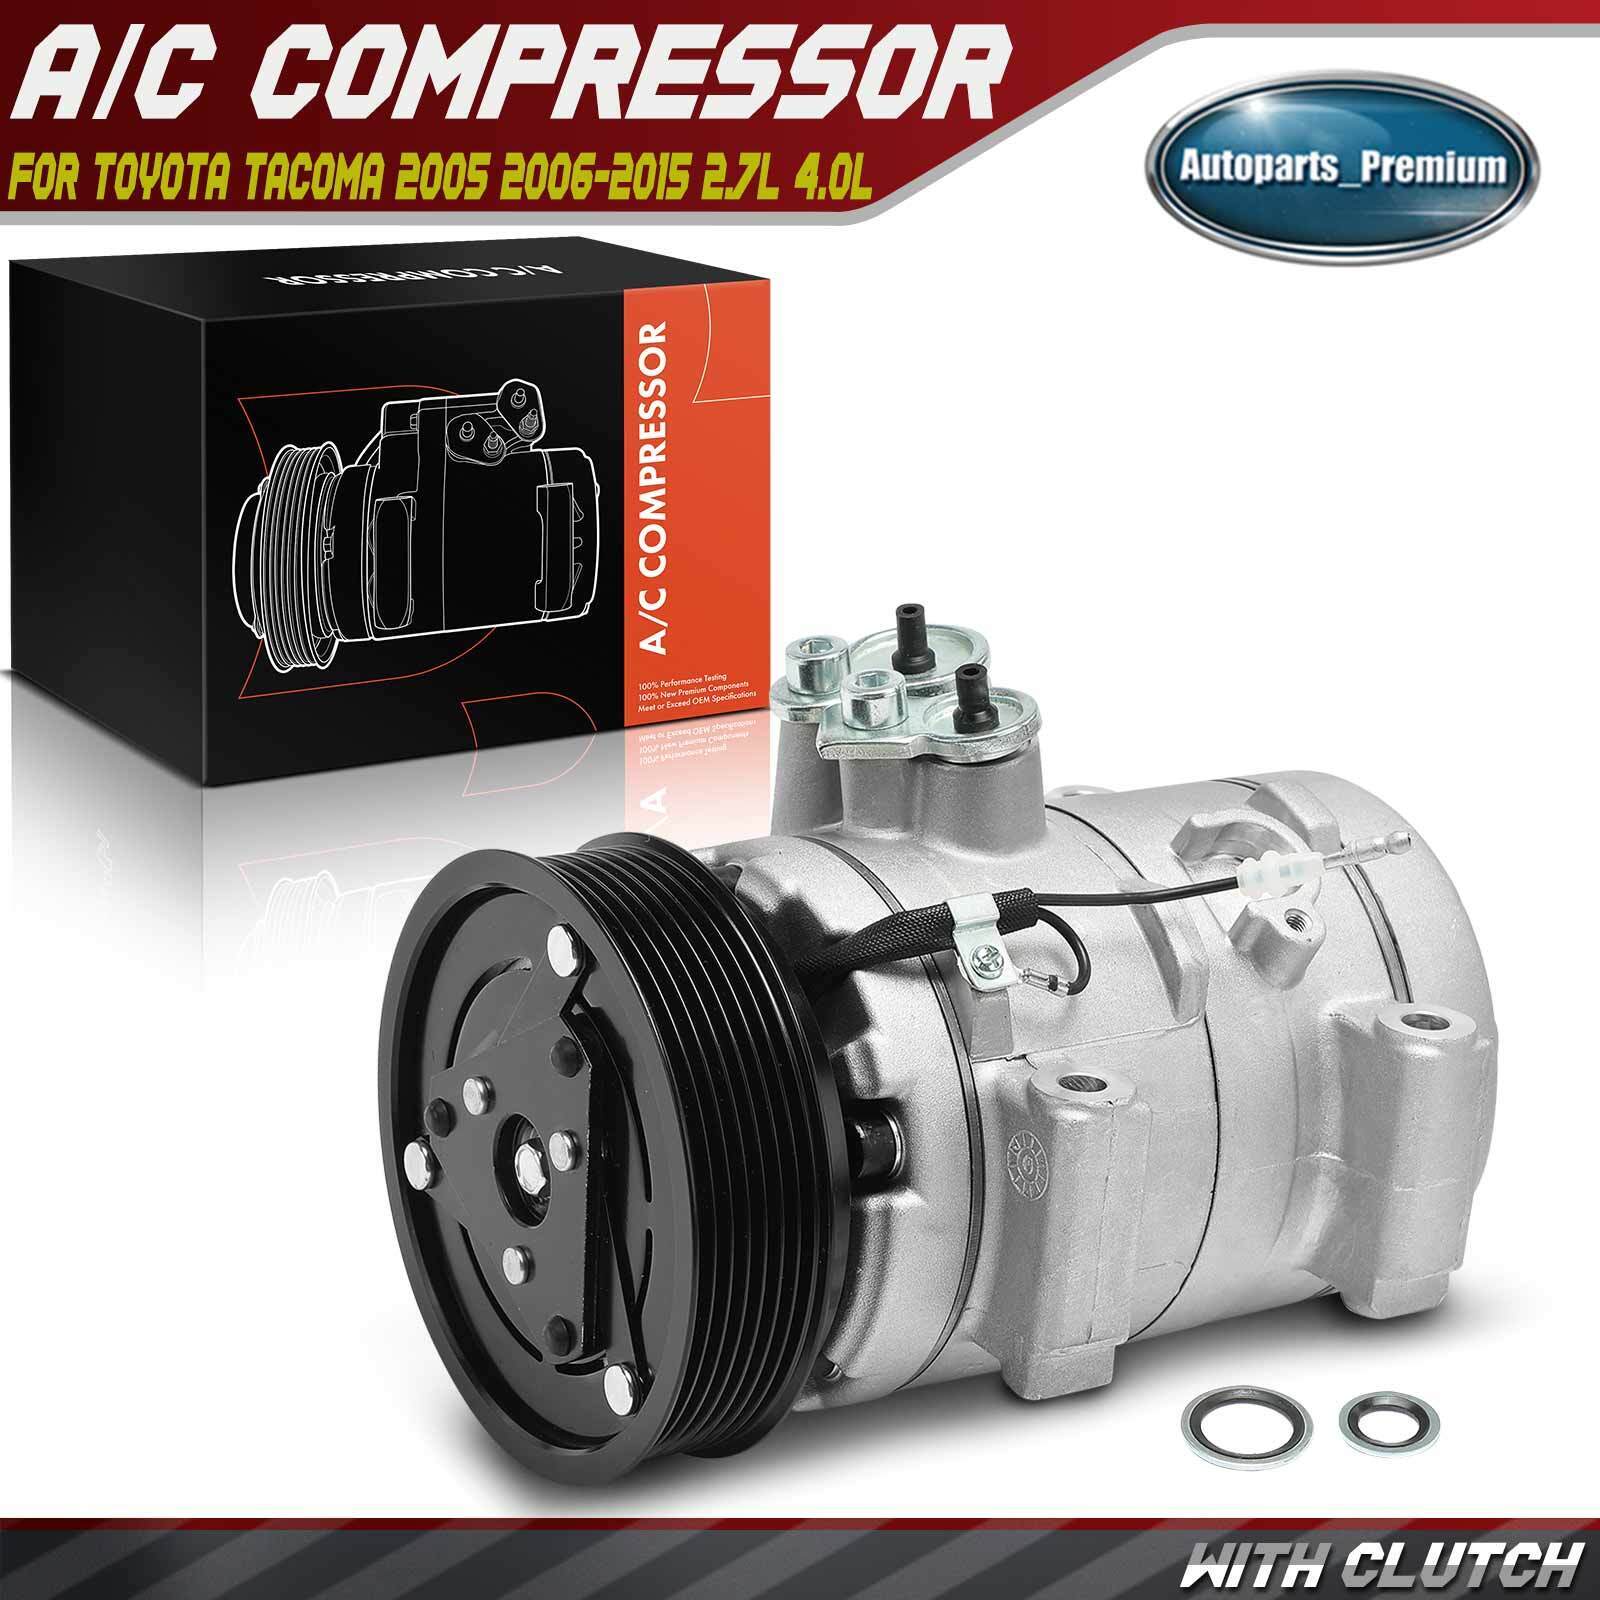 AC Compressor with Clutch for Toyota Tacoma 2005-2015 L4 2.7L V6 4.0L 8832004060